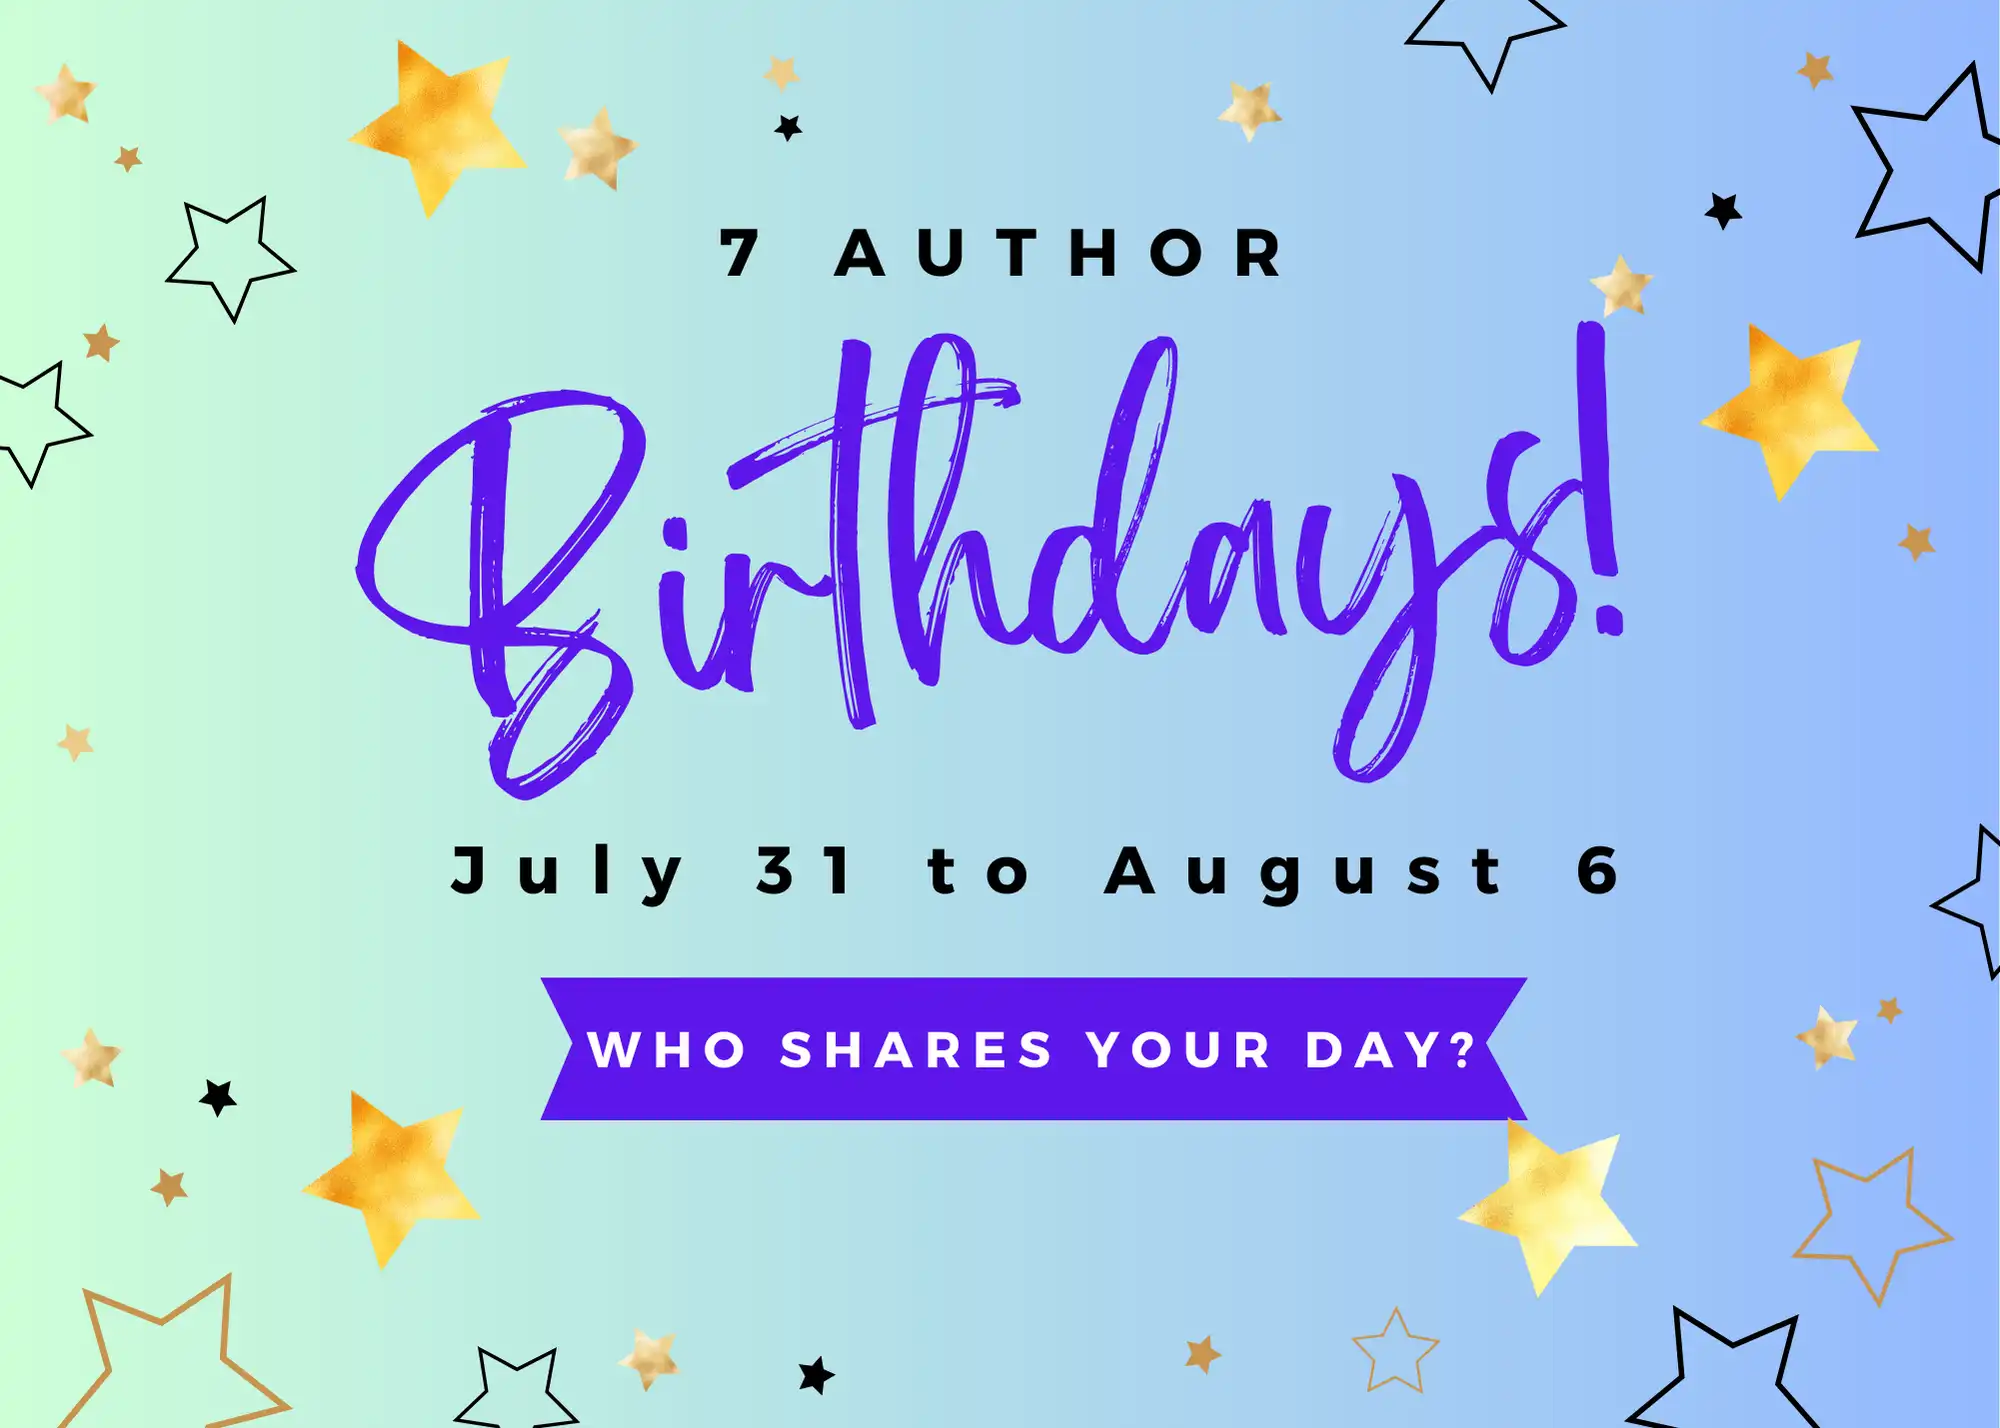 author birthdays who shares your day?